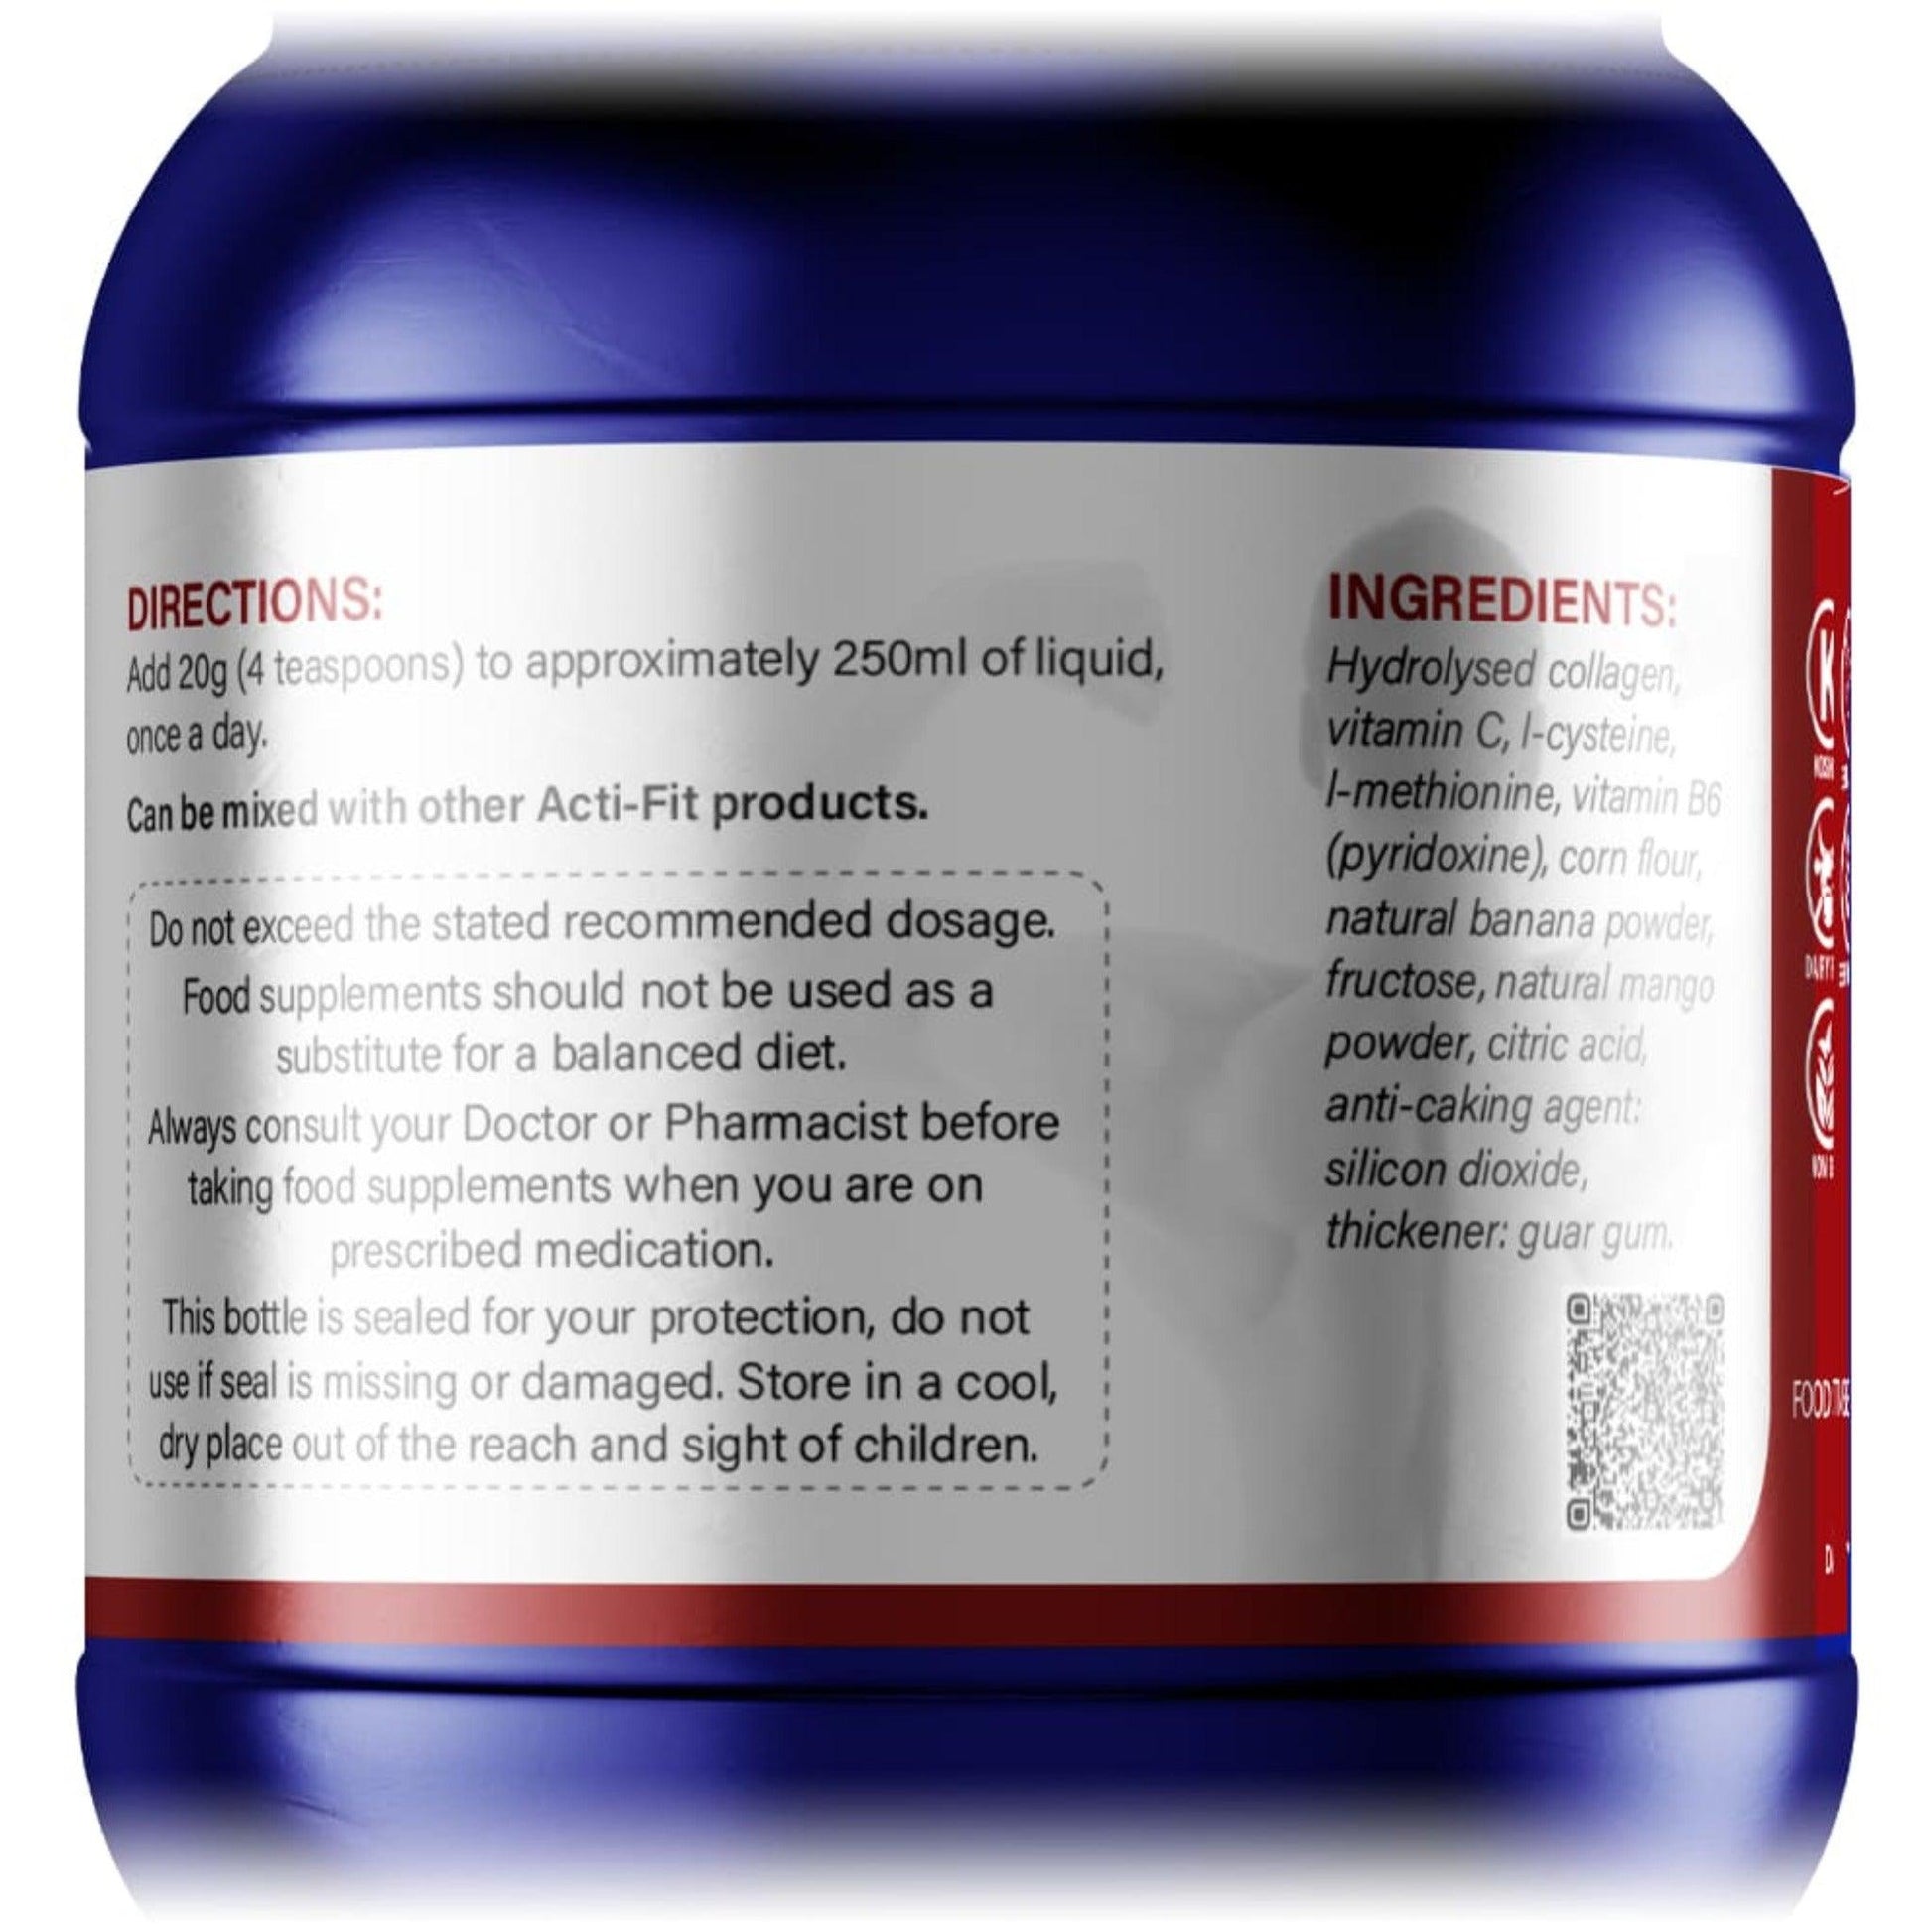 Acti-Fit Hydrolysed Collagen 4000mg High Strength label highlighting ingredients and directions for use.